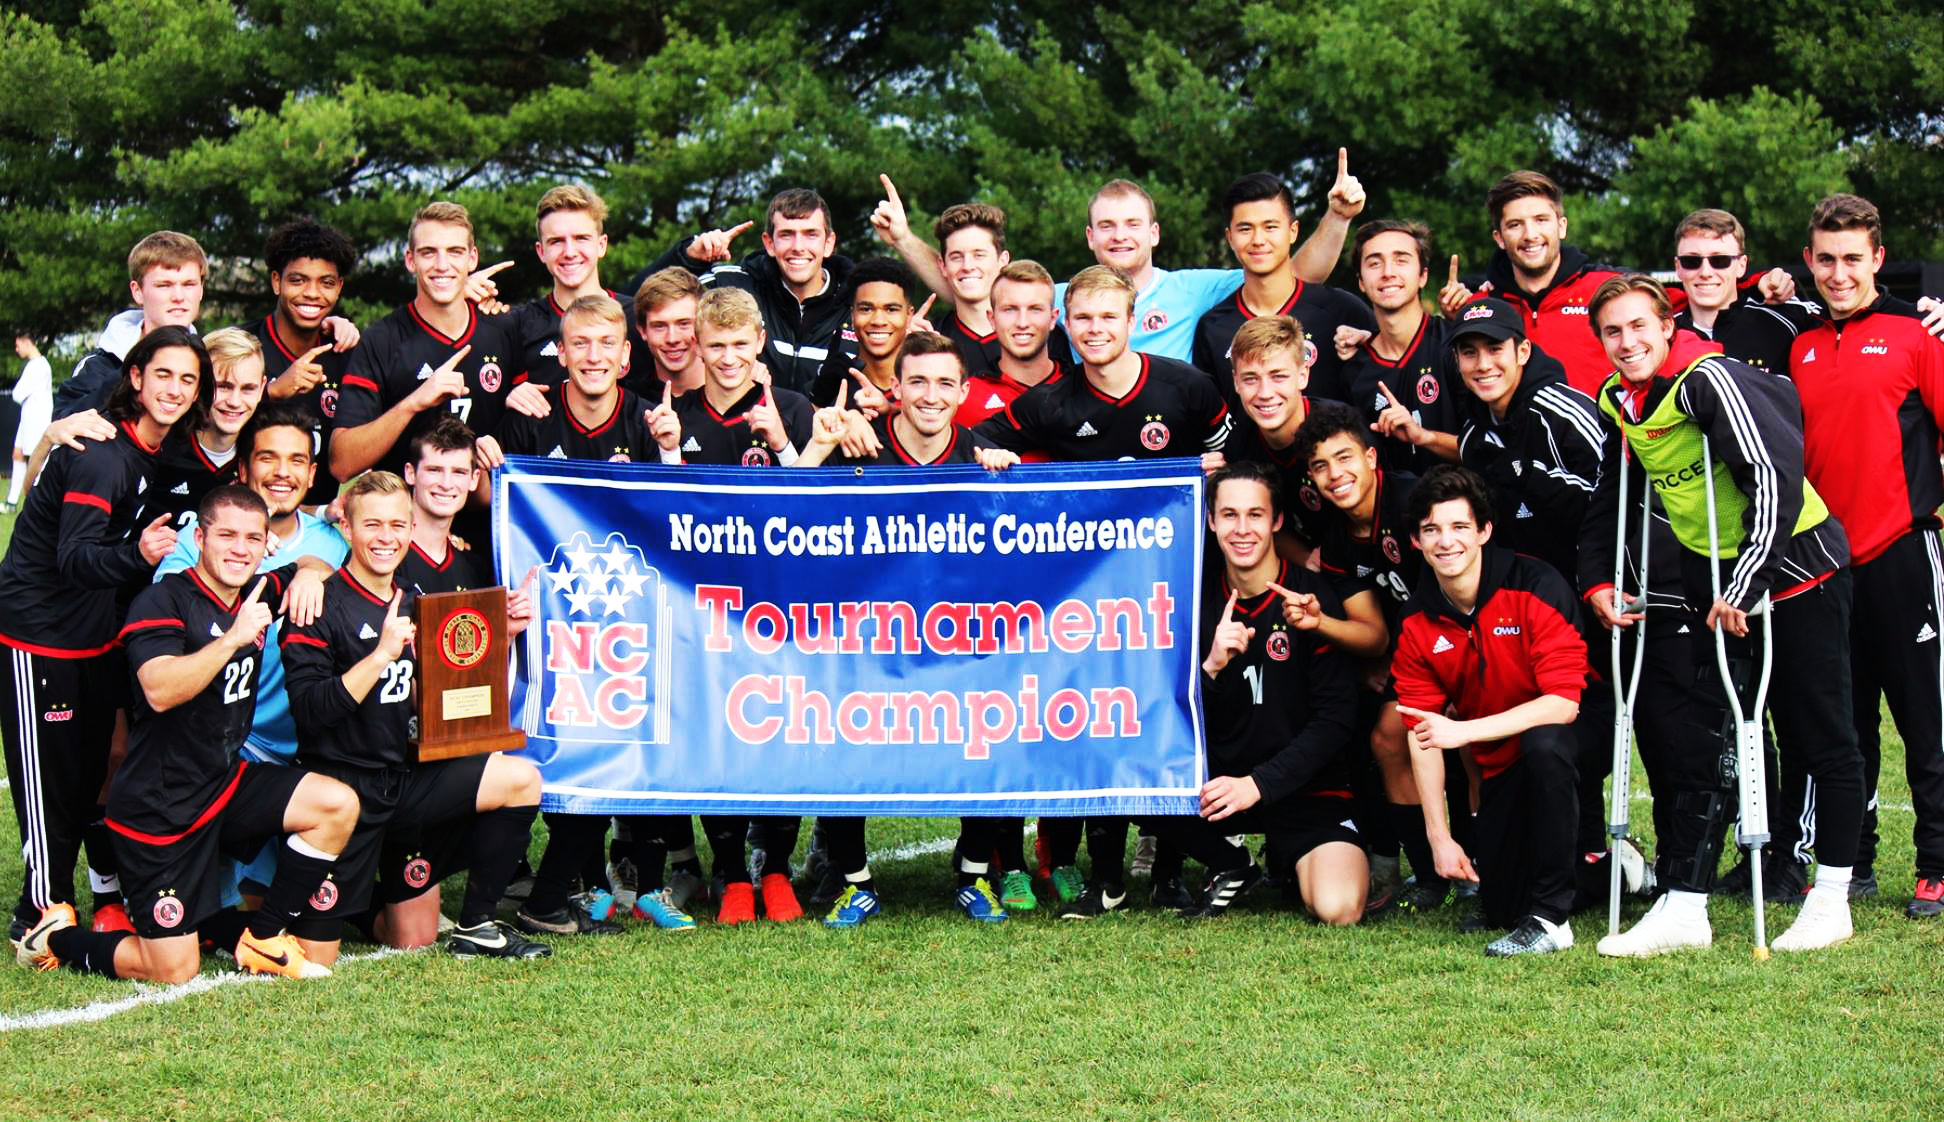 Men’s soccer team wins NCAC title in dramatic fashion